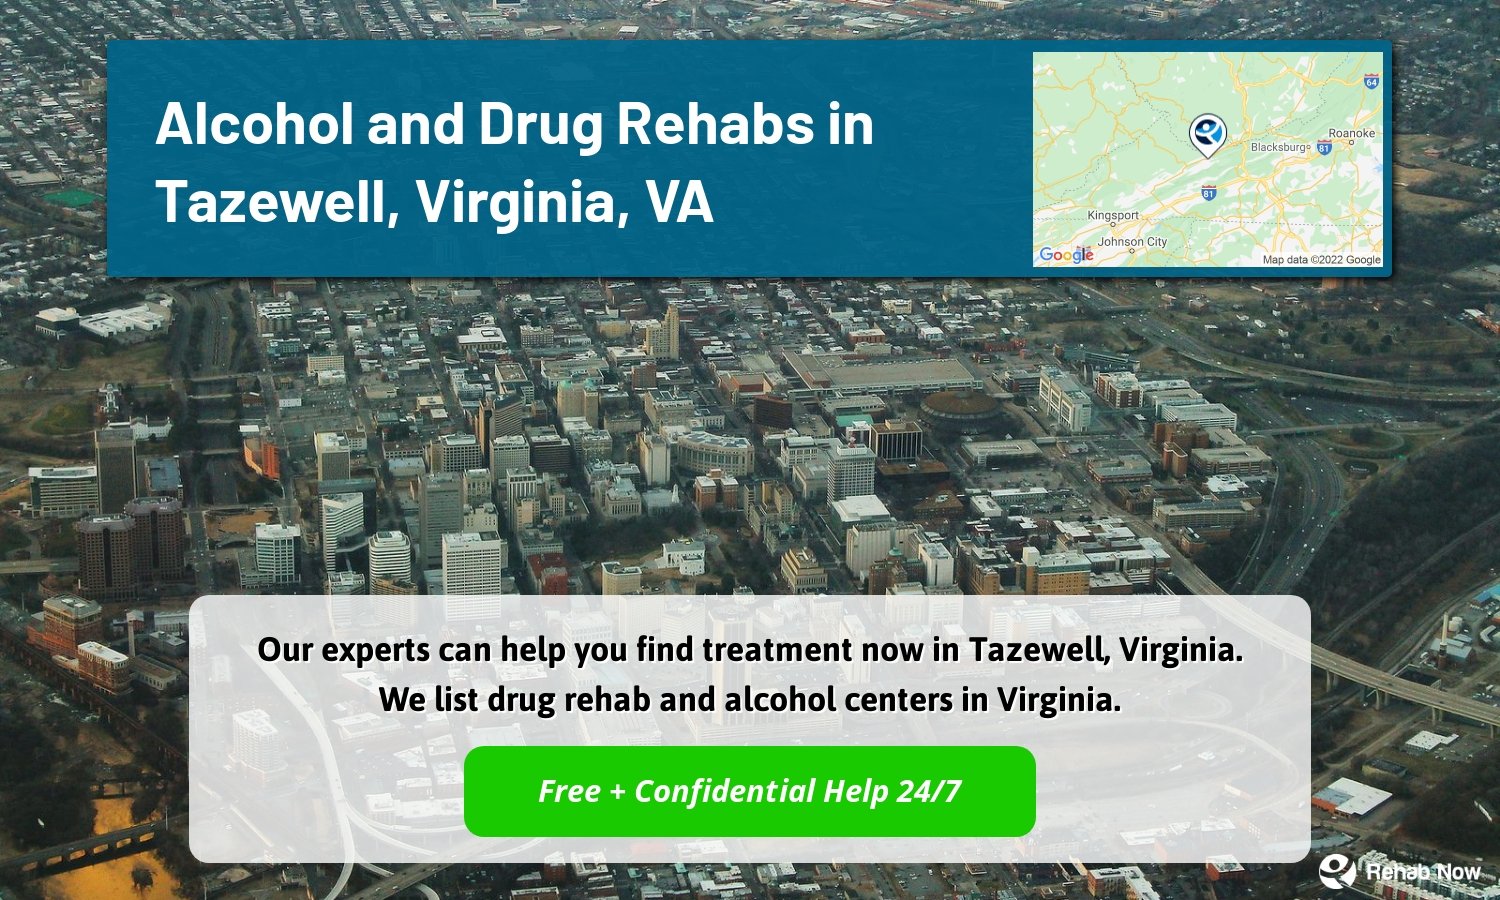 Our experts can help you find treatment now in Tazewell, Virginia. We list drug rehab and alcohol centers in Virginia.